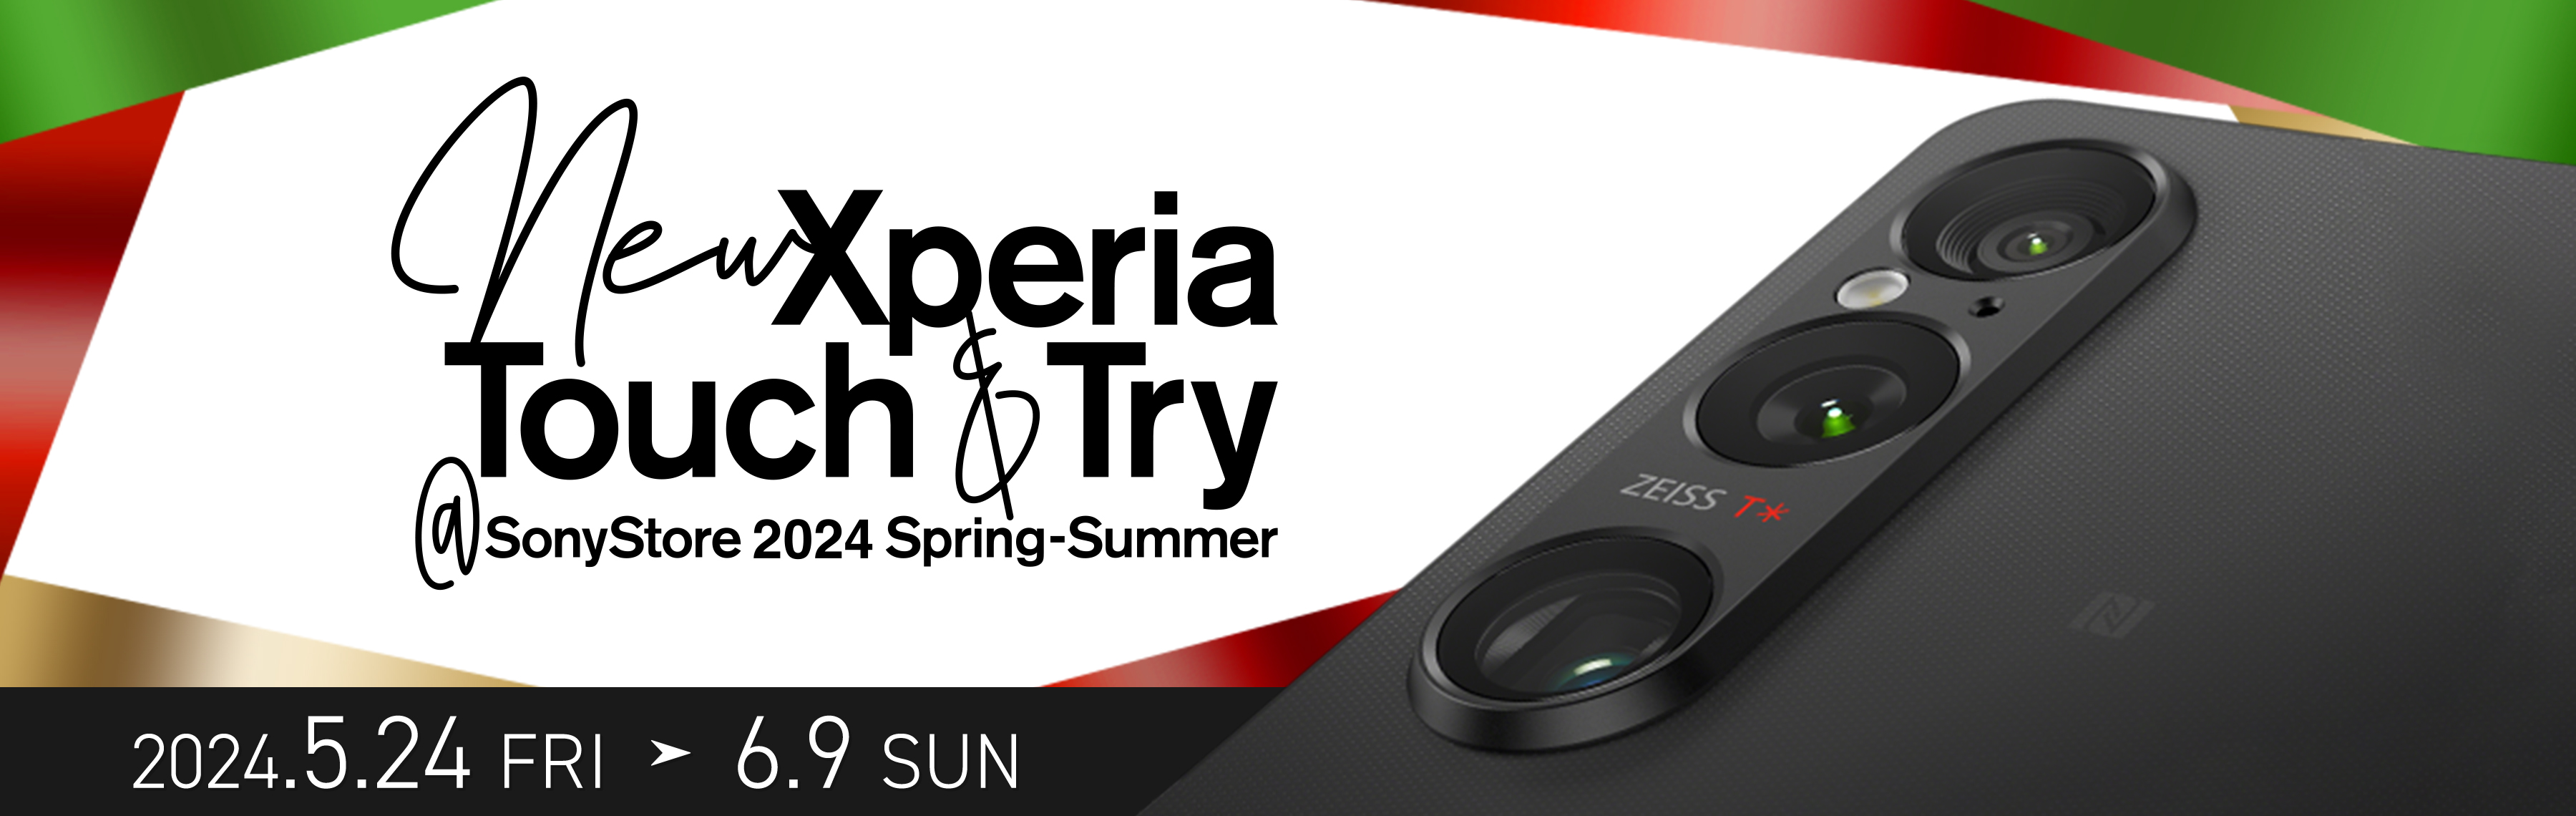 NewXperia Touch&Try SonyStore 2024 Spring-Summer 2024.5.24 FRI → 2024.6.9 SUN